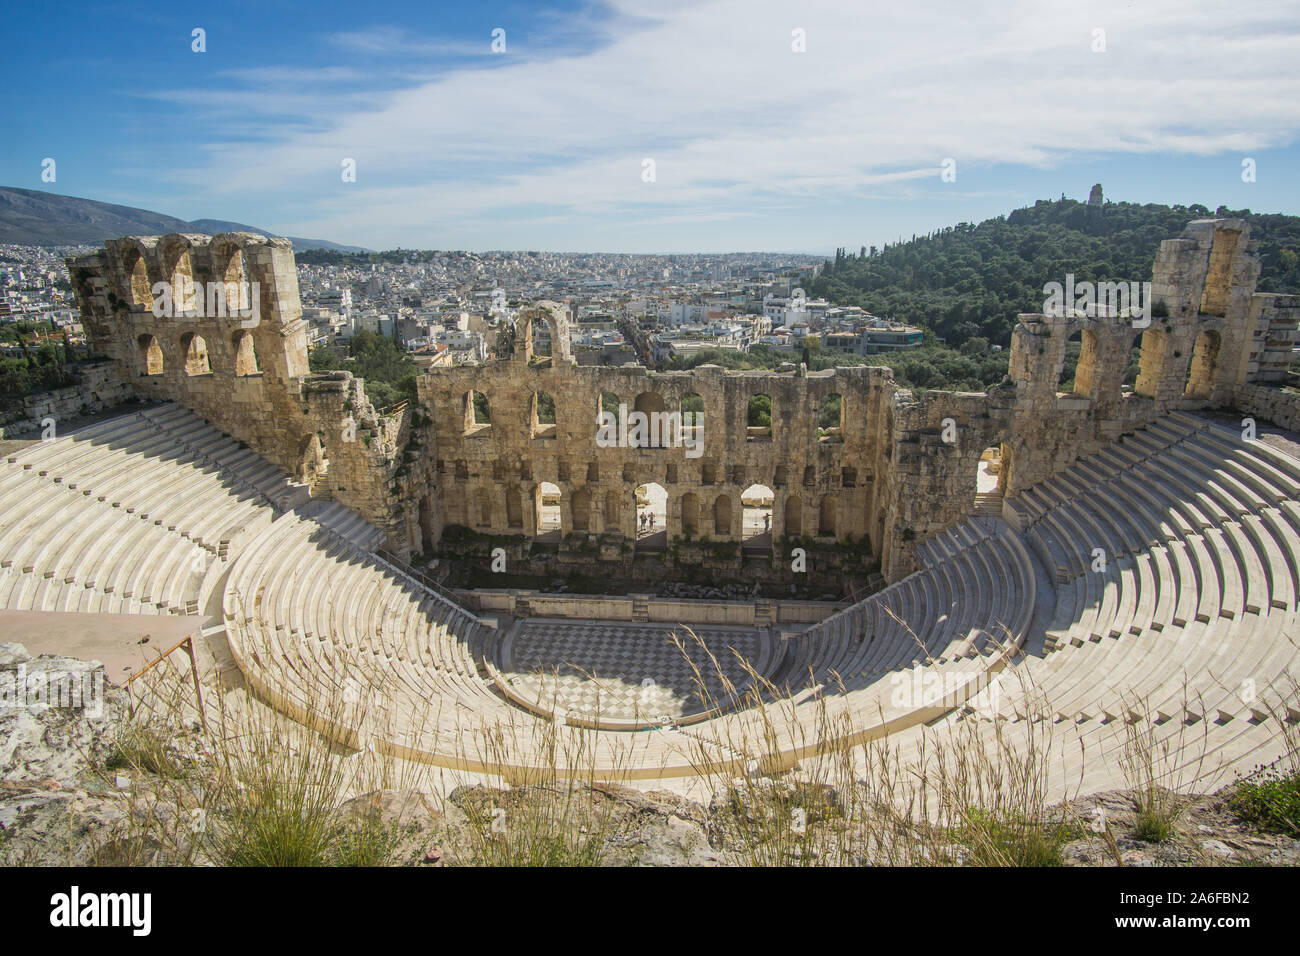 Odeon of Herodes Atticus Arena on a beautiful sunny day at the acropolis hill in Athens Greece , this iconic Parthenon and its surroundings are more t Stock Photo